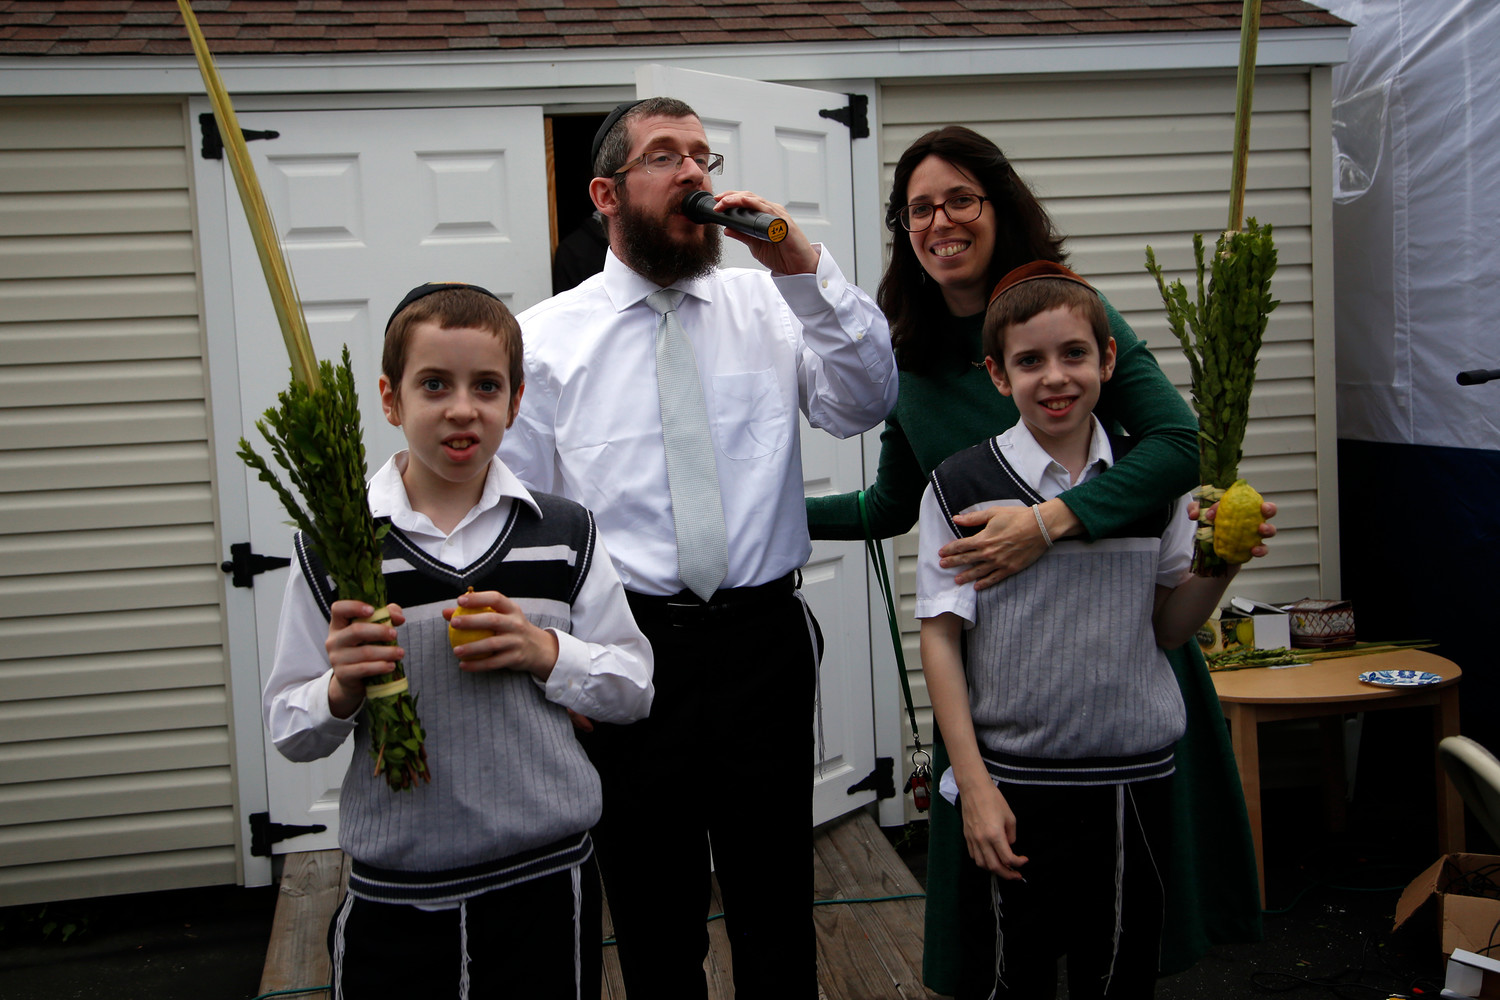 The Kramers and their sons led Simchat Torah festivities this year at the Chabad Center.